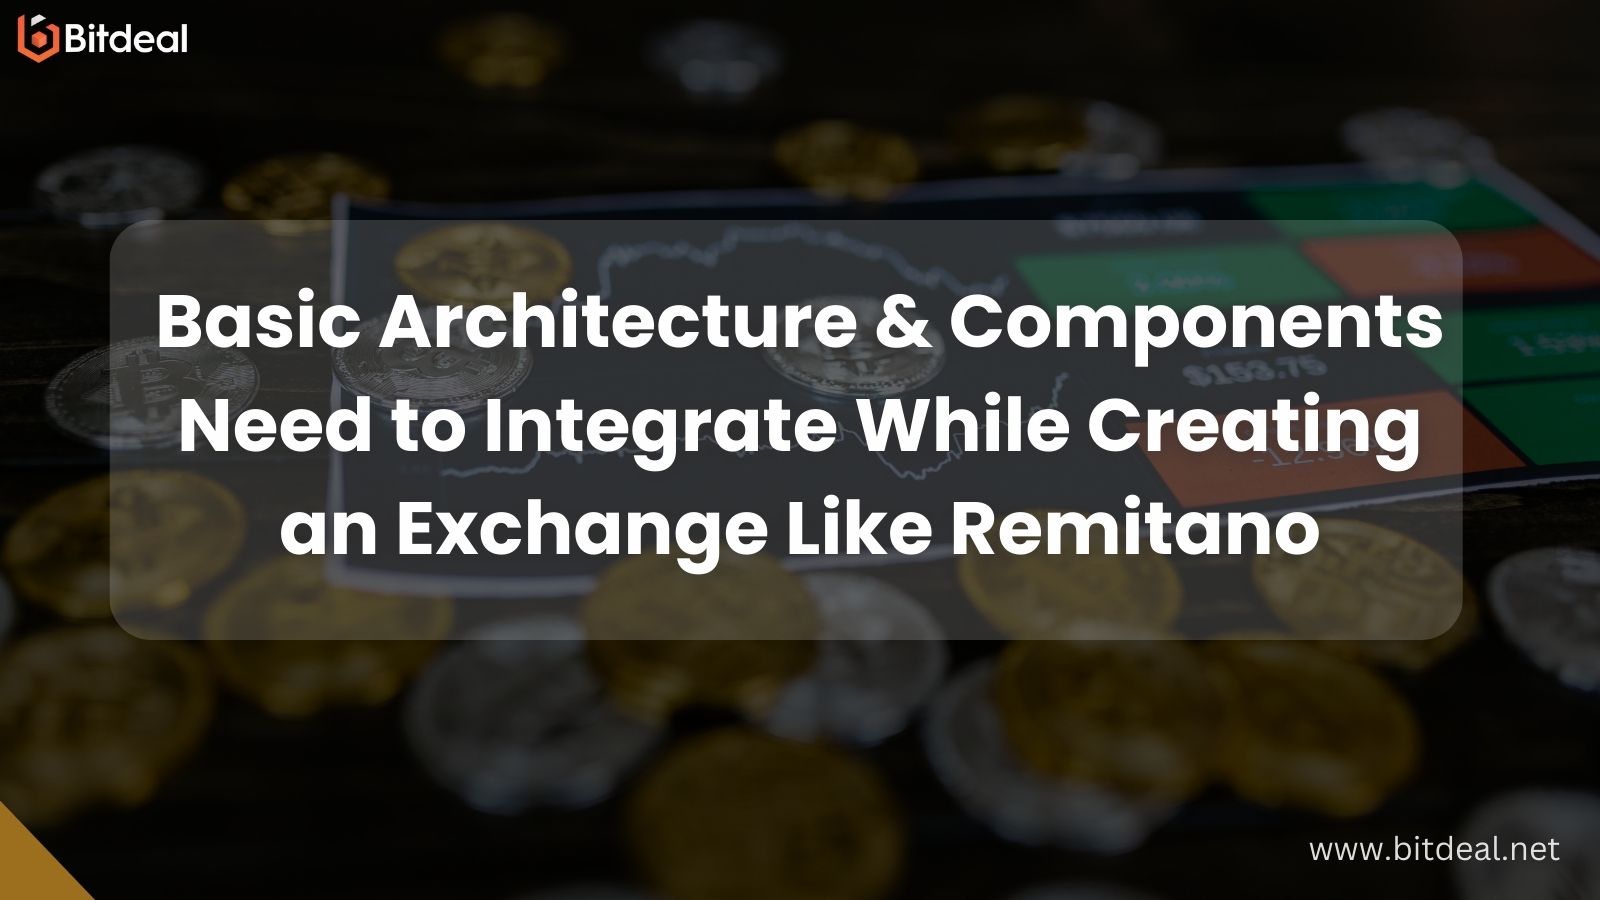 Basic Architecture & Components Need to Integrate While Creating an Exchange Like Remitano